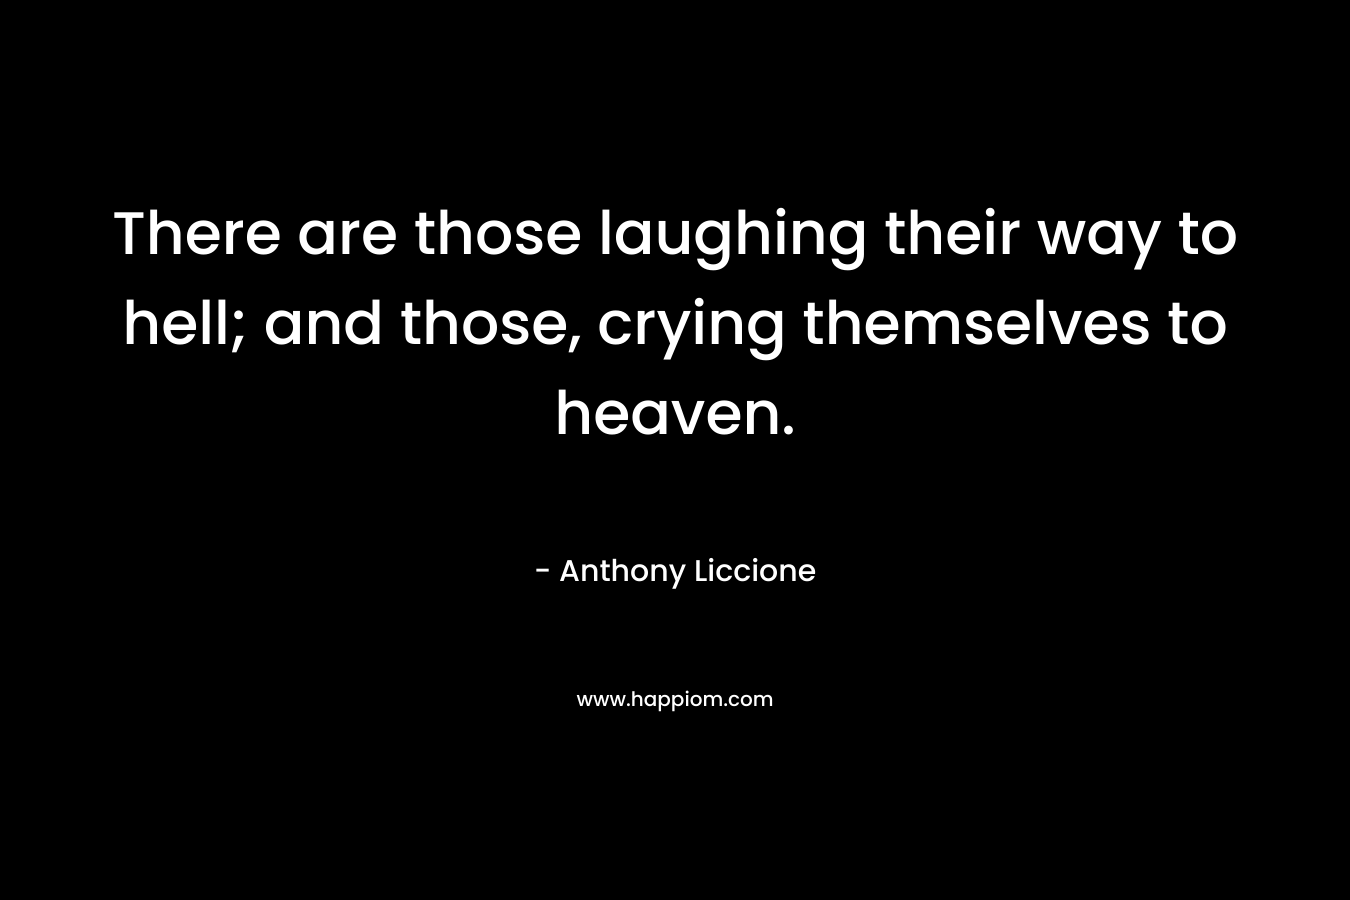 There are those laughing their way to hell; and those, crying themselves to heaven. – Anthony Liccione